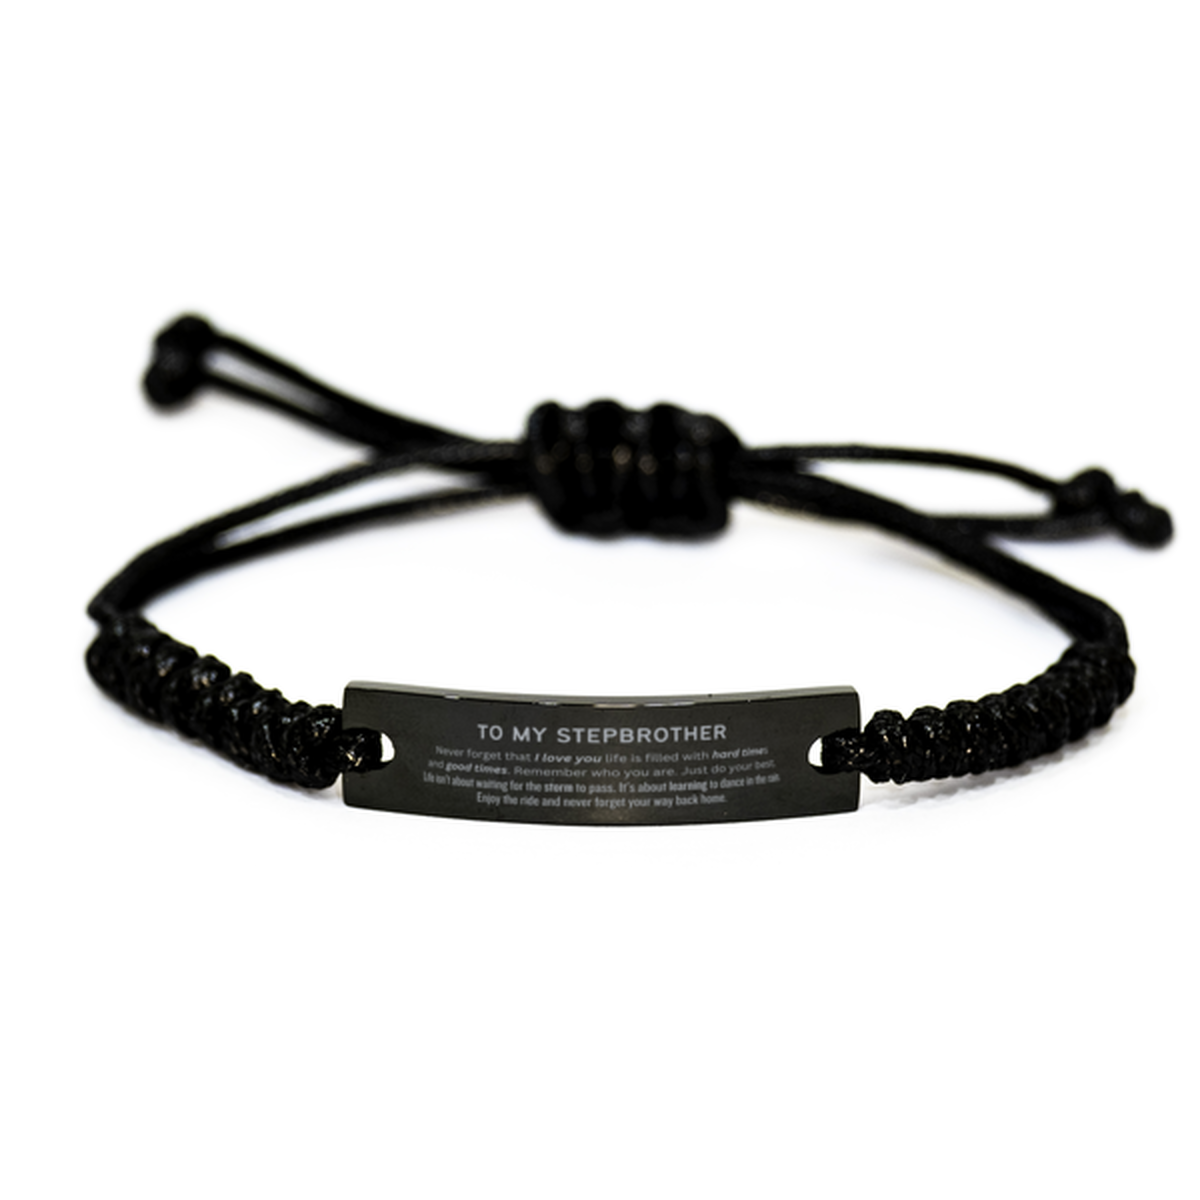 Christmas Stepbrother Black Rope Bracelet Gifts, To My Stepbrother Birthday Thank You Gifts For Stepbrother, Graduation Unique Gifts For Stepbrother To My Stepbrother Never forget that I love you life is filled with hard times and good times. Remember who